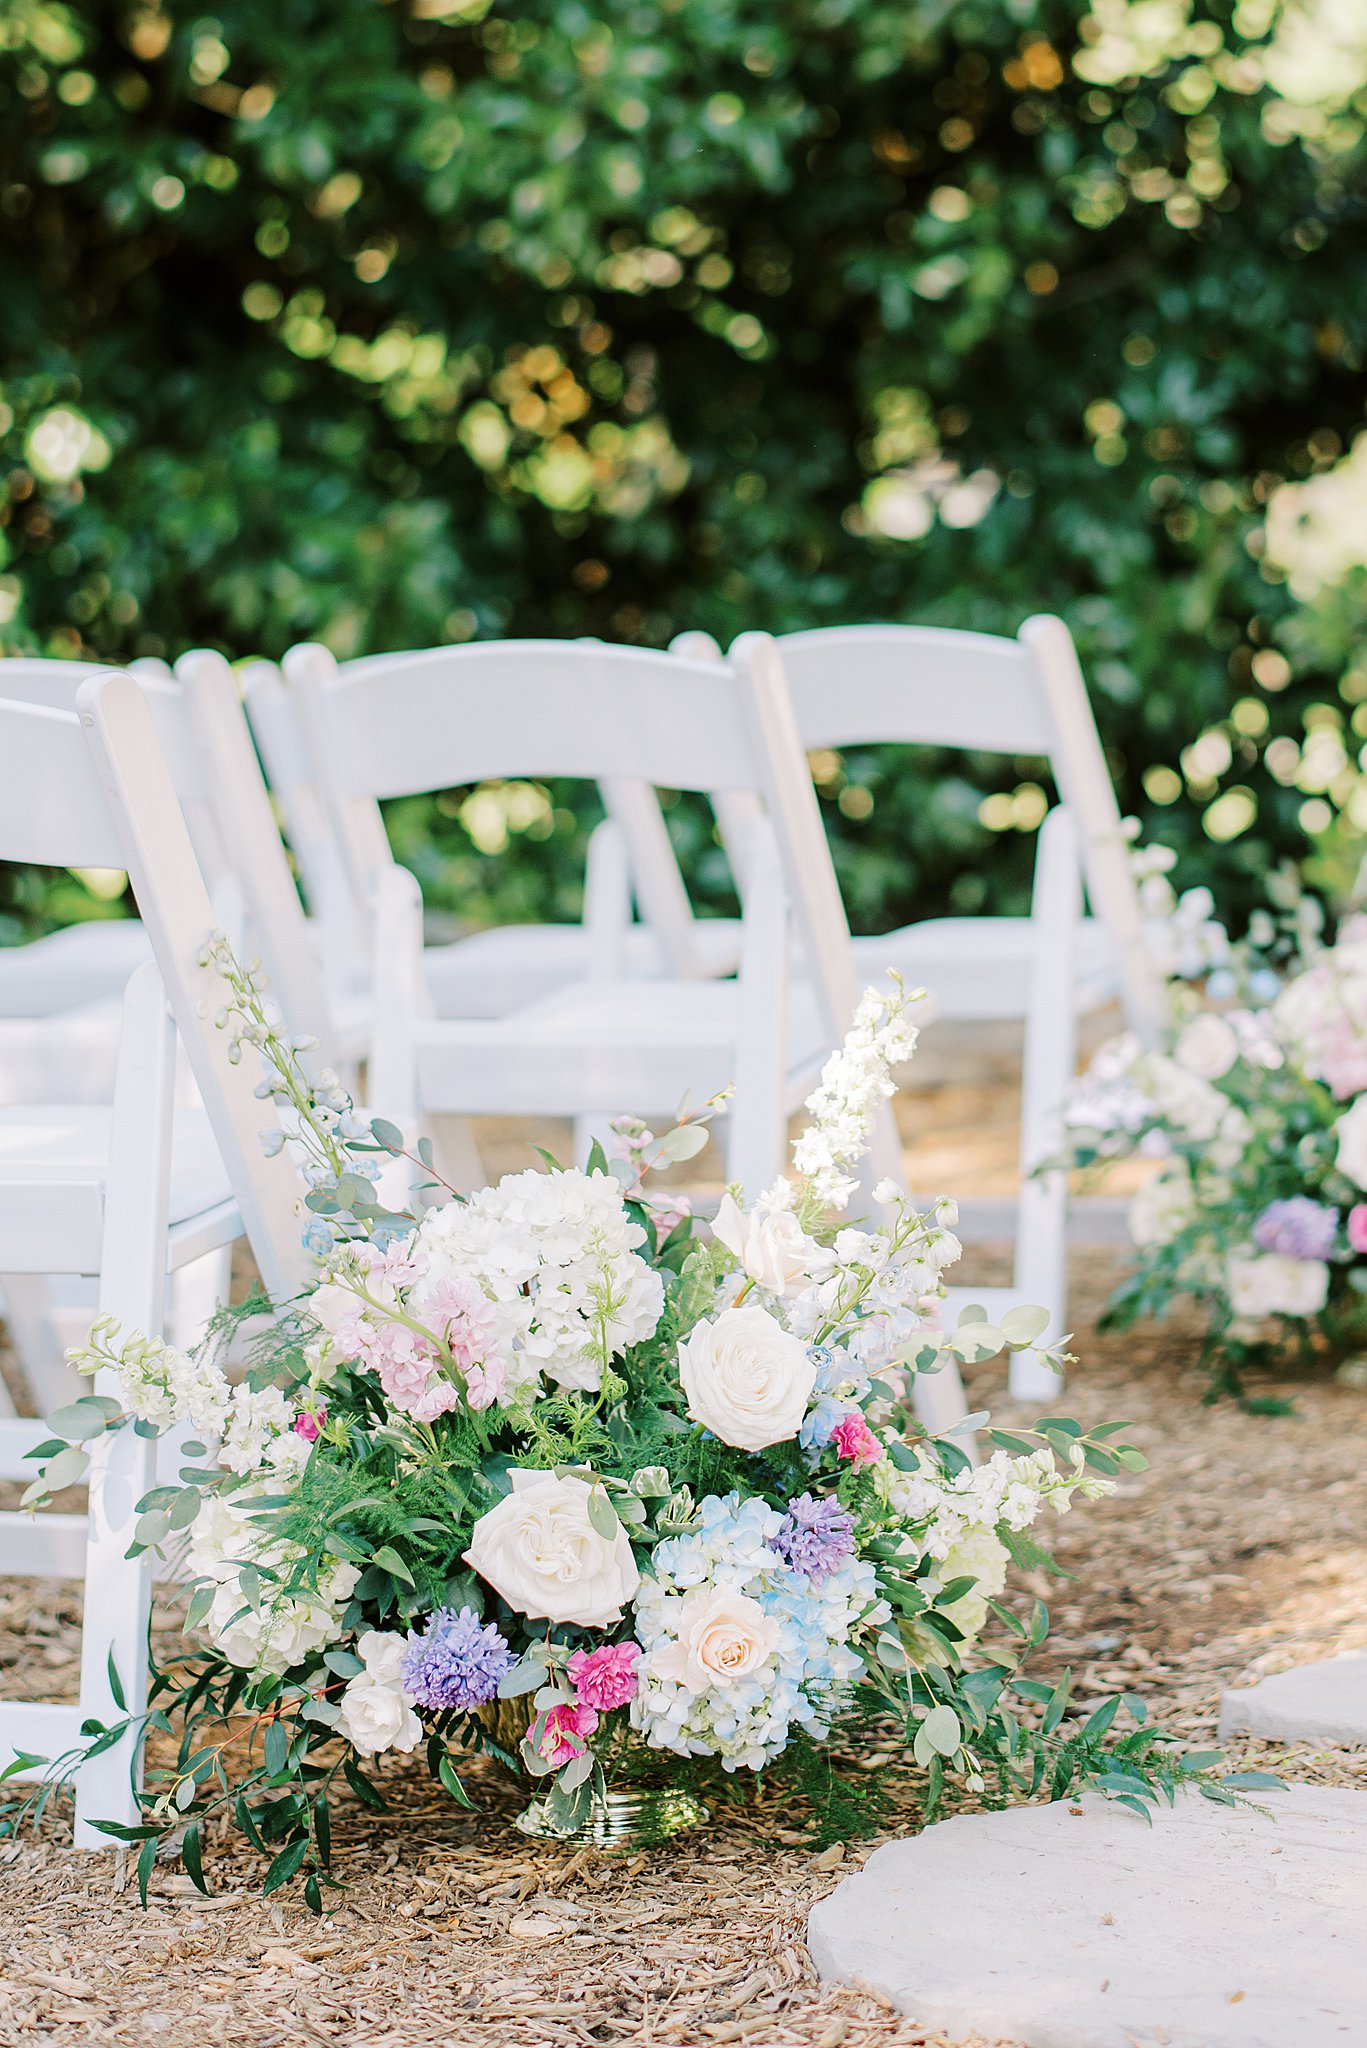 Details of white and pink floral arrangements at a wedding ceremony